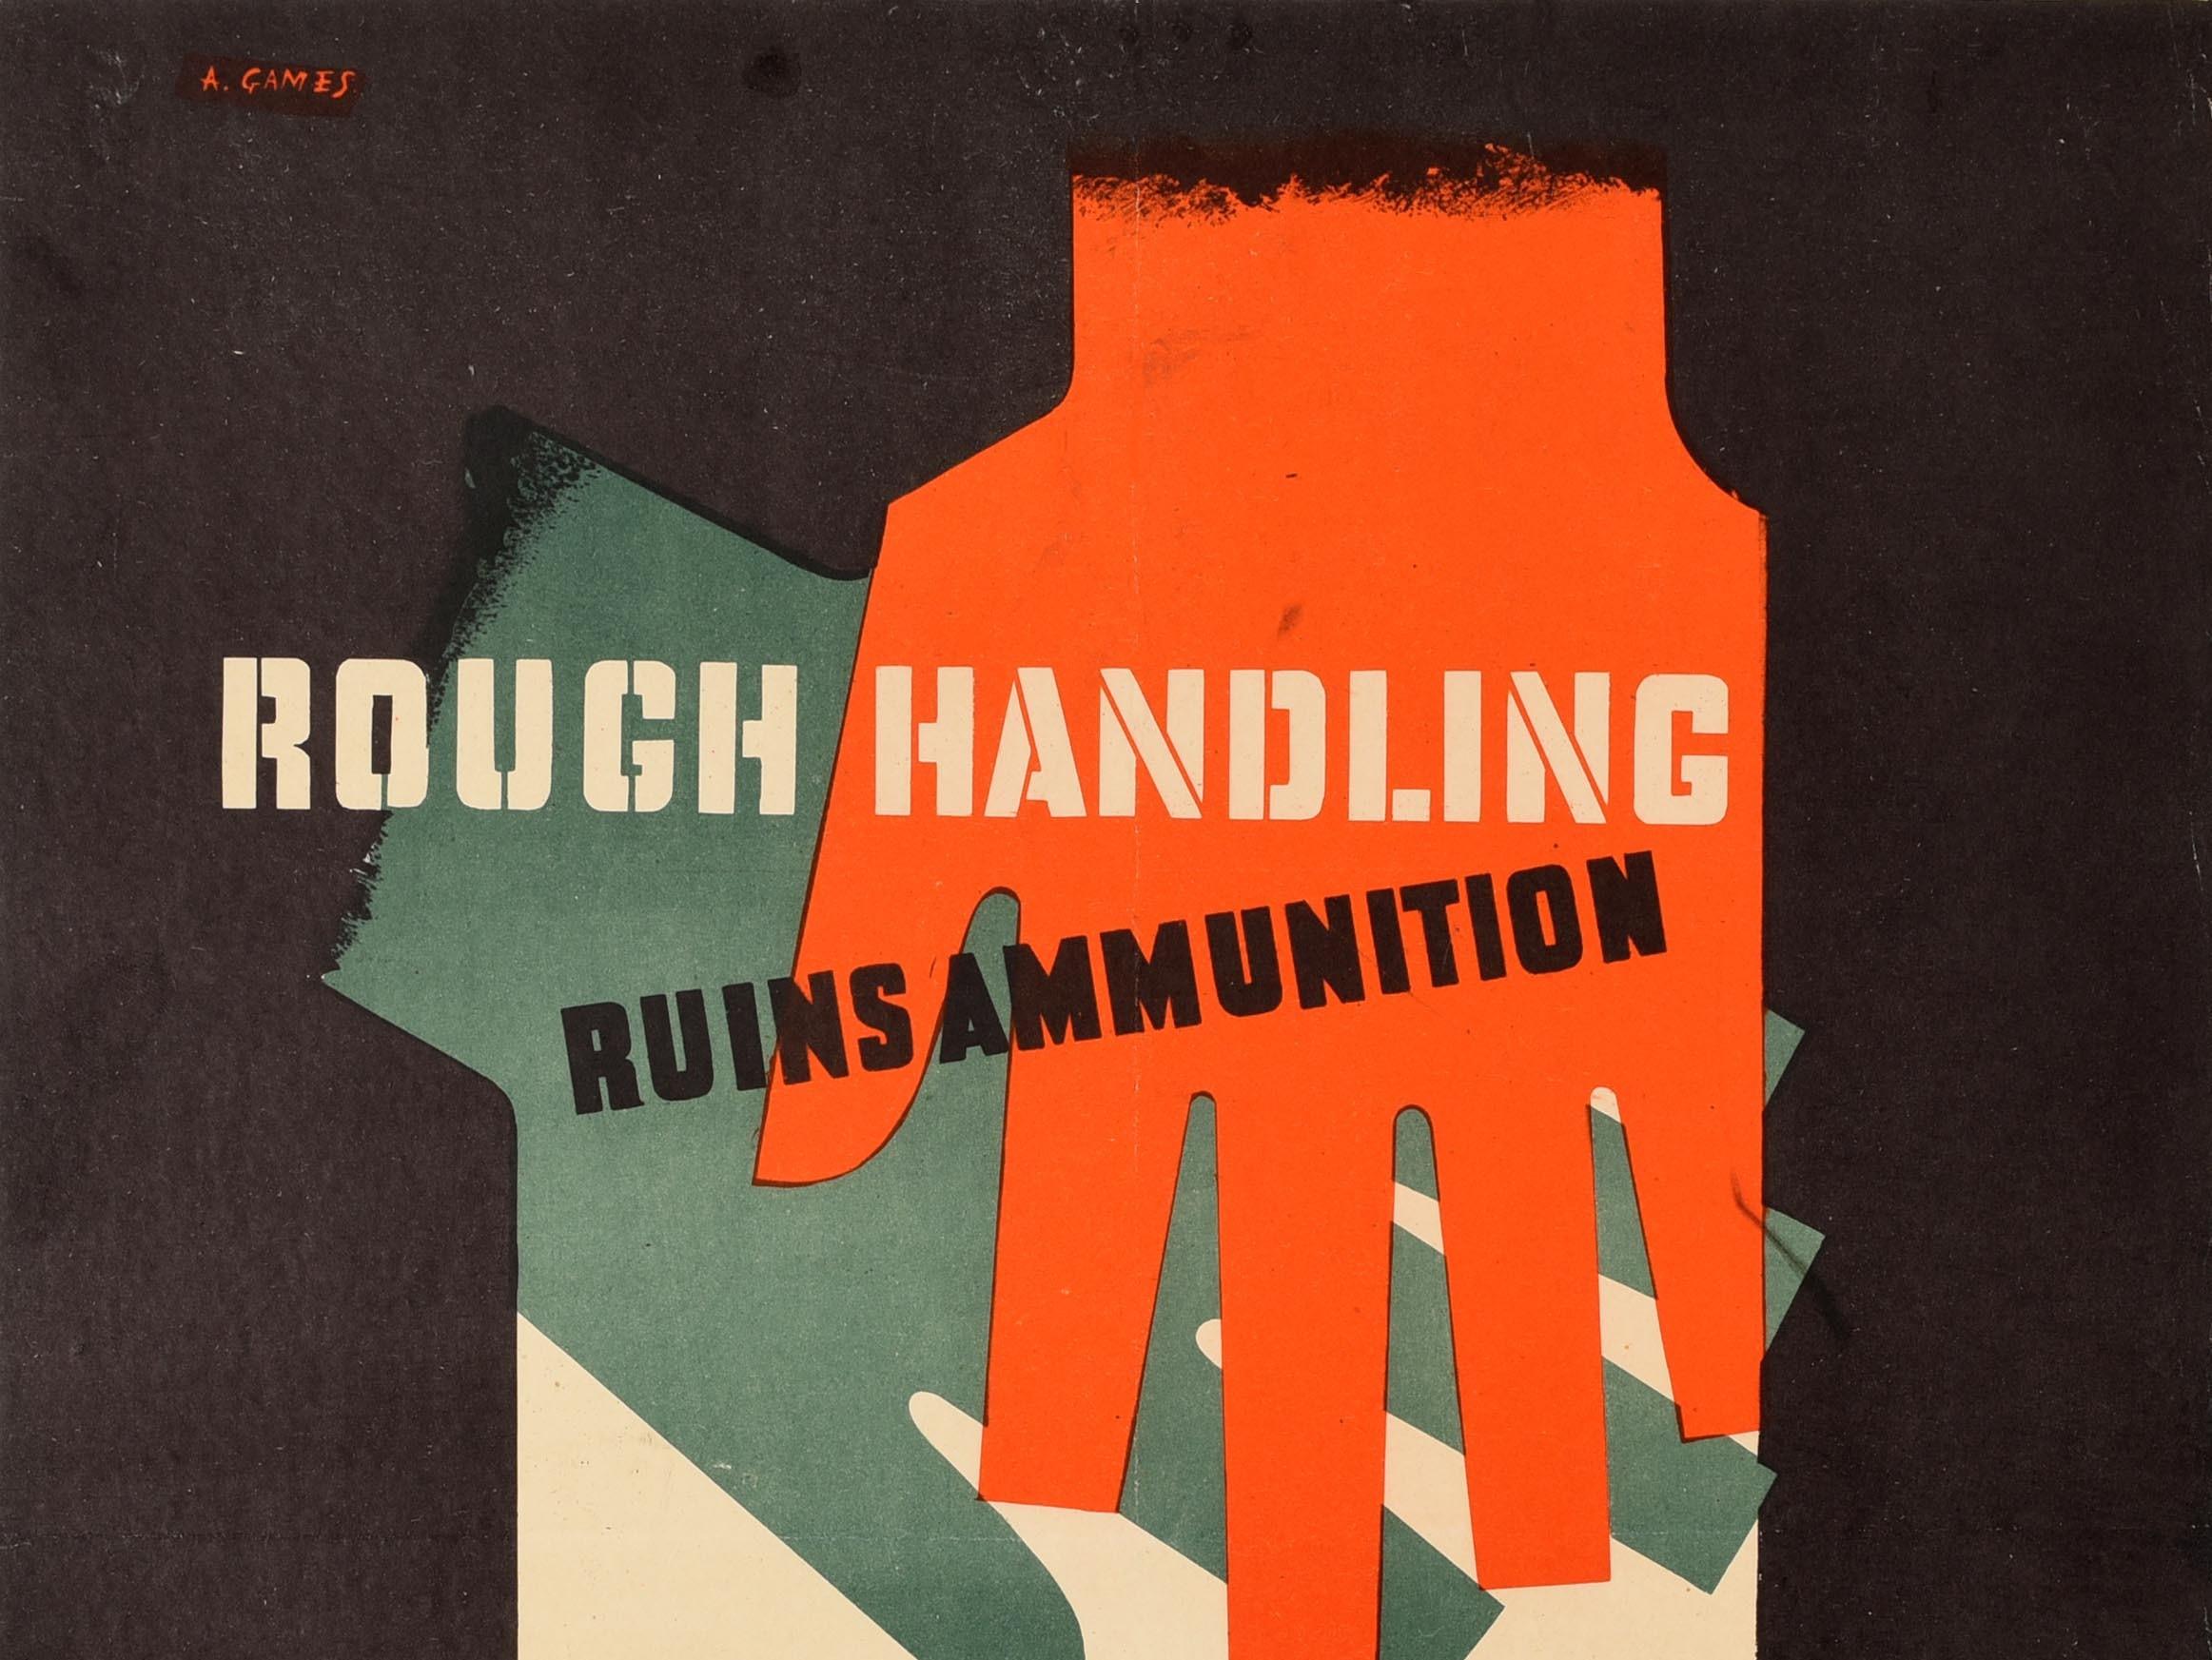 Original vintage World War Two military safety propaganda poster - Rough Handling Ruins Ammunition Handle It With Care - featuring a dynamic design by the notable British graphic designer Abram Games (Abraham Gamse; 1914-1996) depicting two stylised